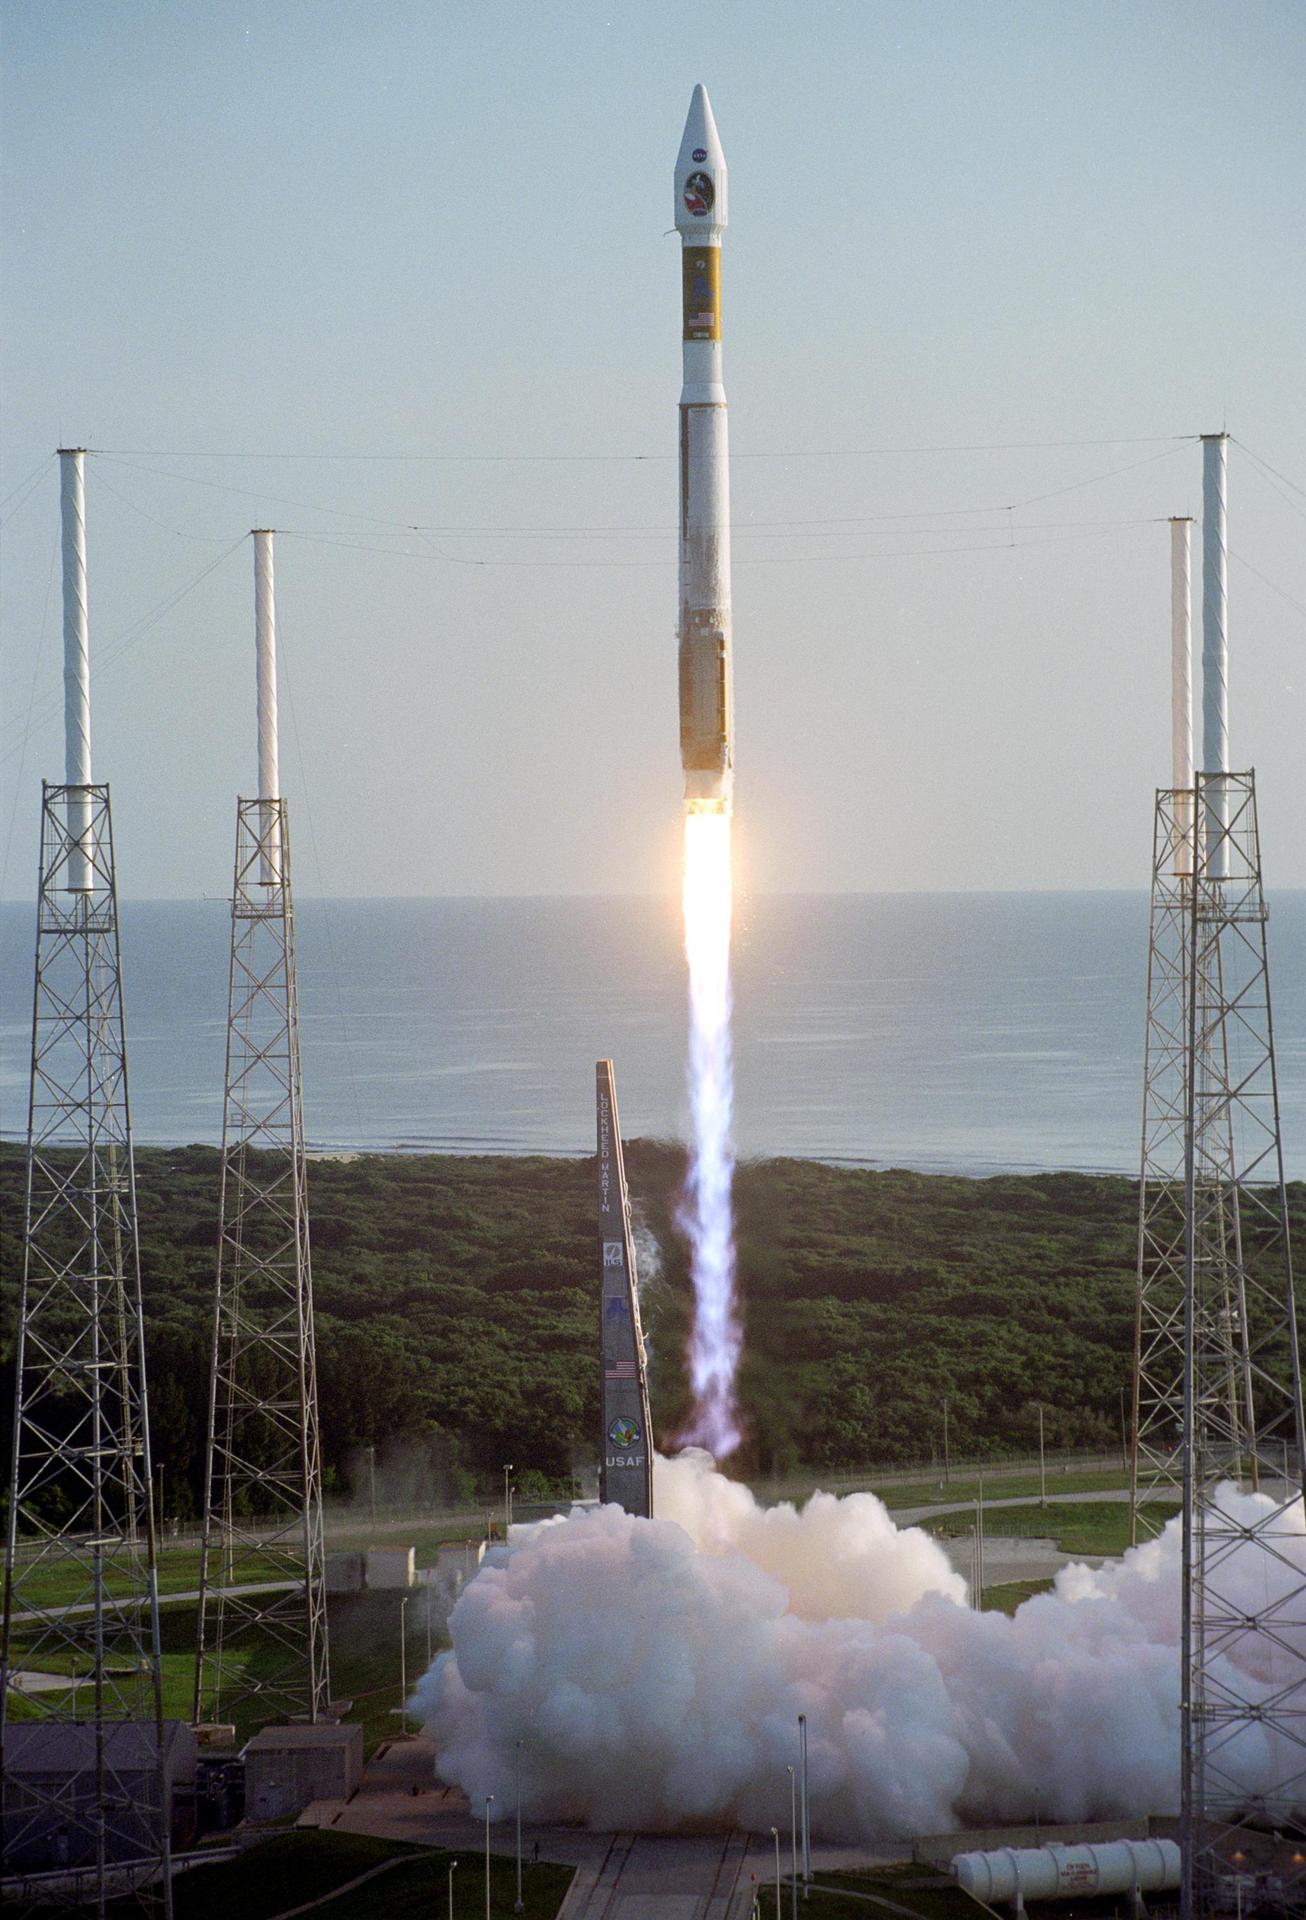 NASA's Mars Reconnaissance Orbiter launches atop an Atlas V rocket on Aug. 12, 2005 from Launch Complex 41 at CCAFS.